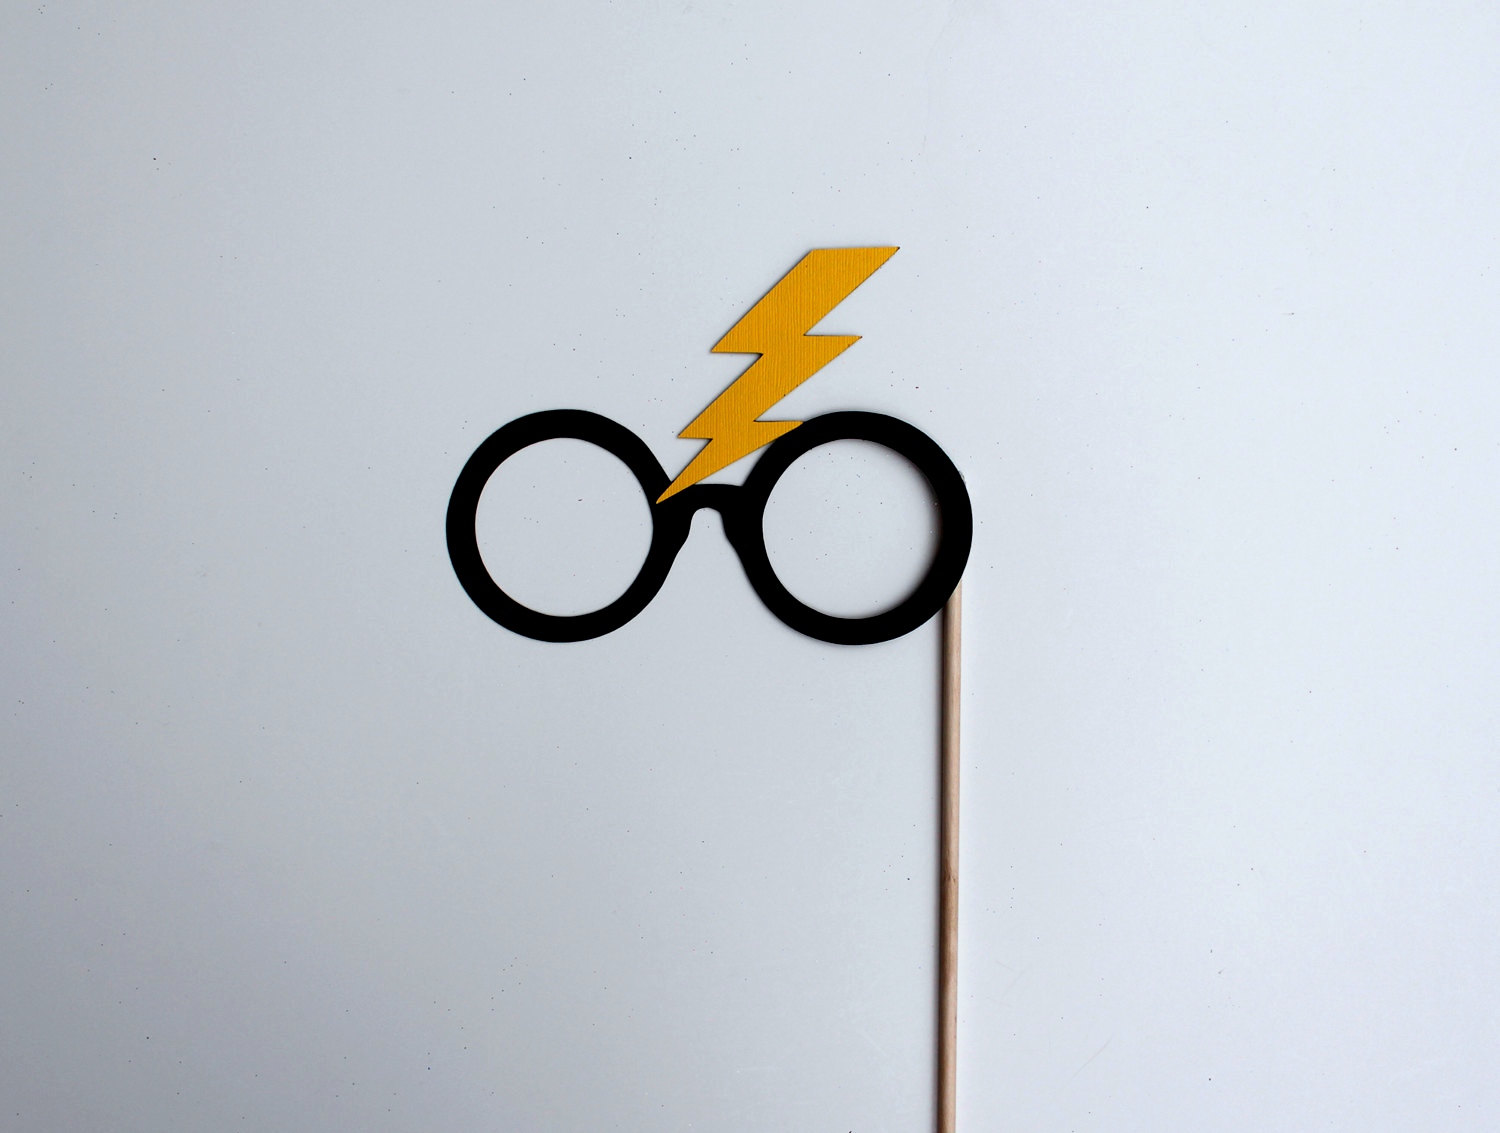 Mature Harry Potter Photo Booth Props Harry by TOASTEDProps